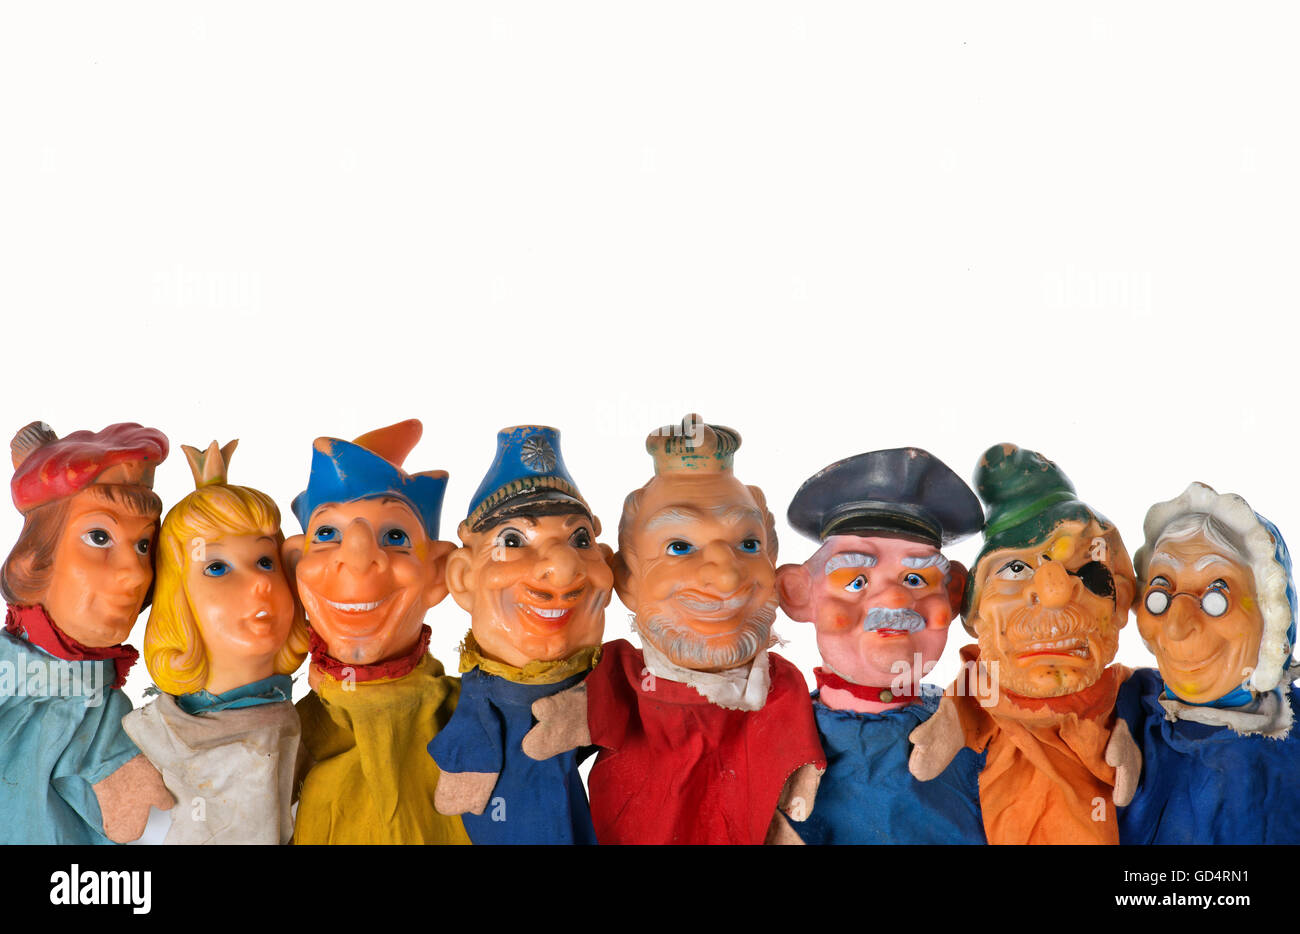 toys, dolls, Punch-and-Judy puppets, Germany, circa 1955, Additional-Rights-Clearences-Not Available Stock Photo